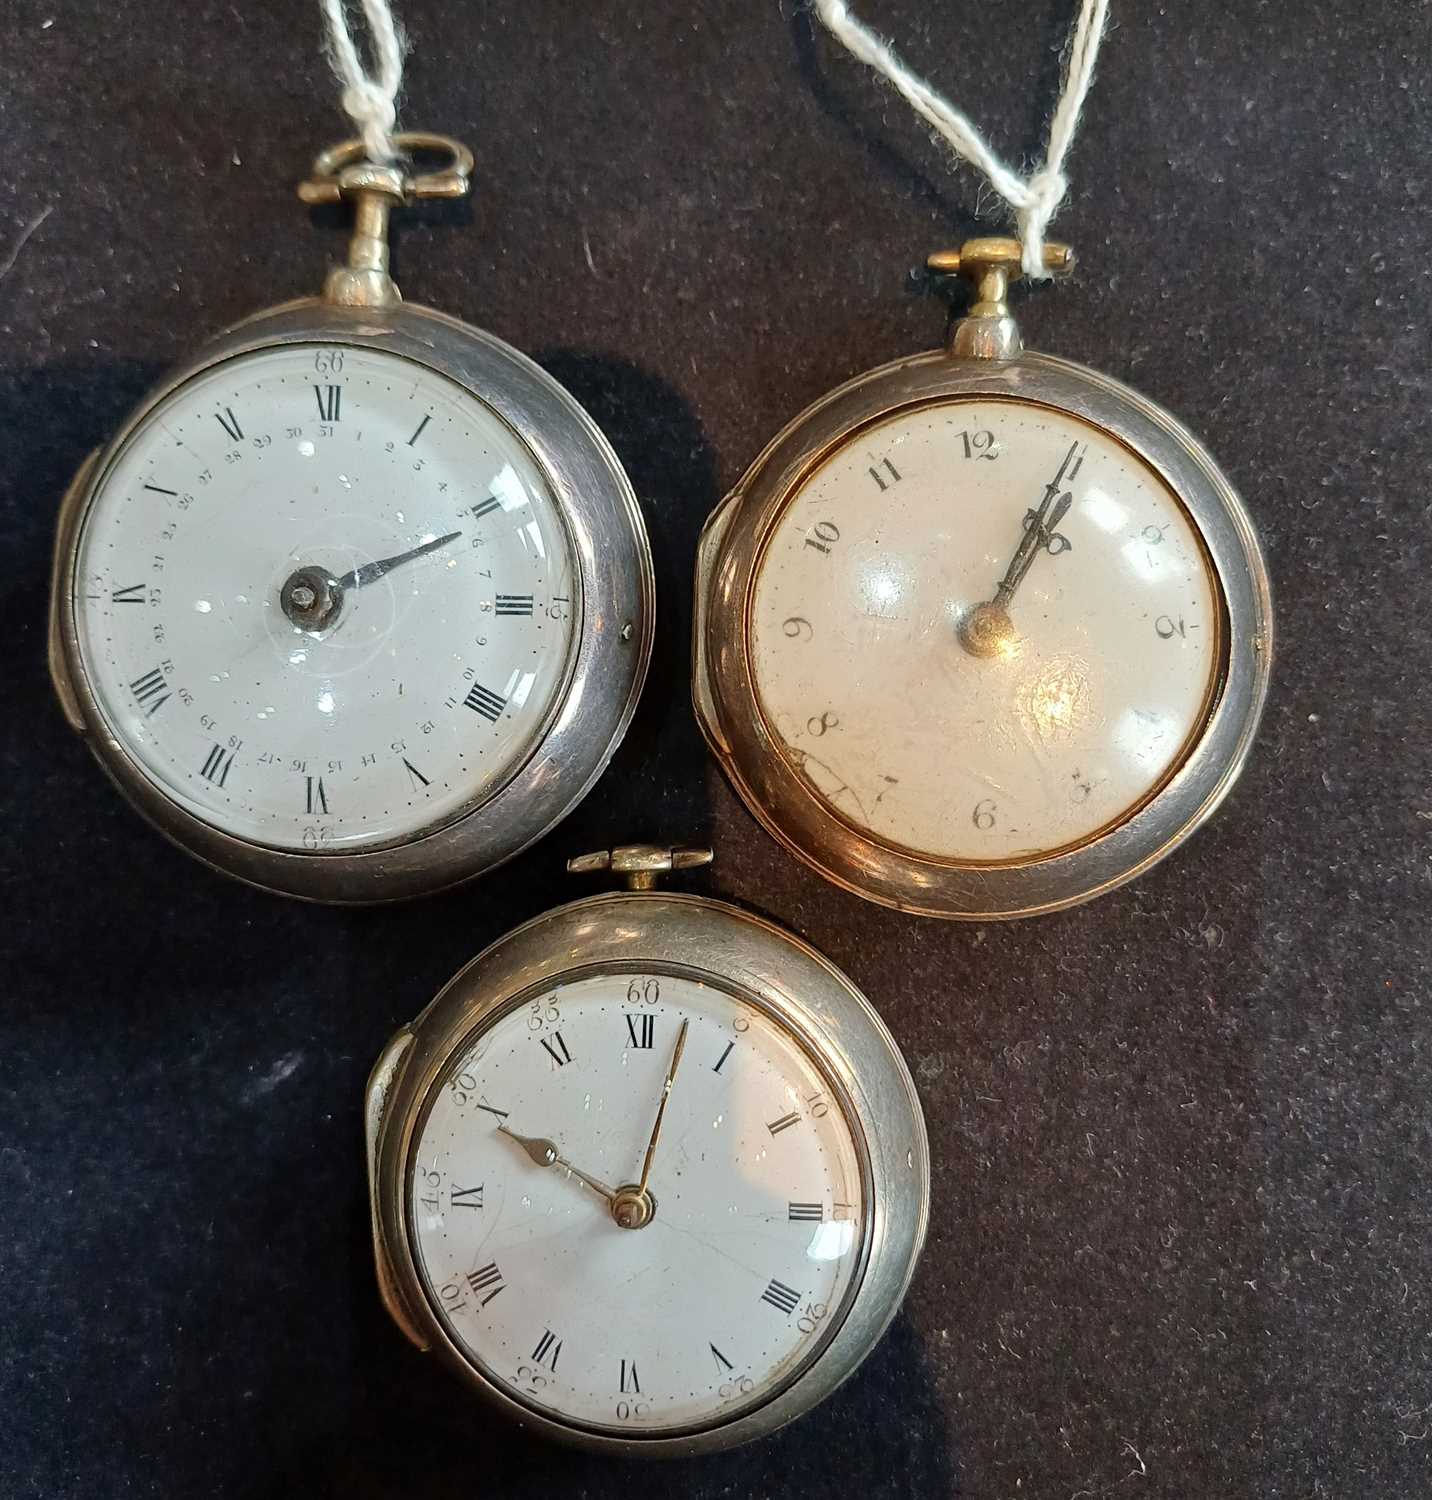 Three Silver Verge Pair Cased Pocket Watches, signed Jno Pallisone, London, both cases with matching - Image 2 of 4